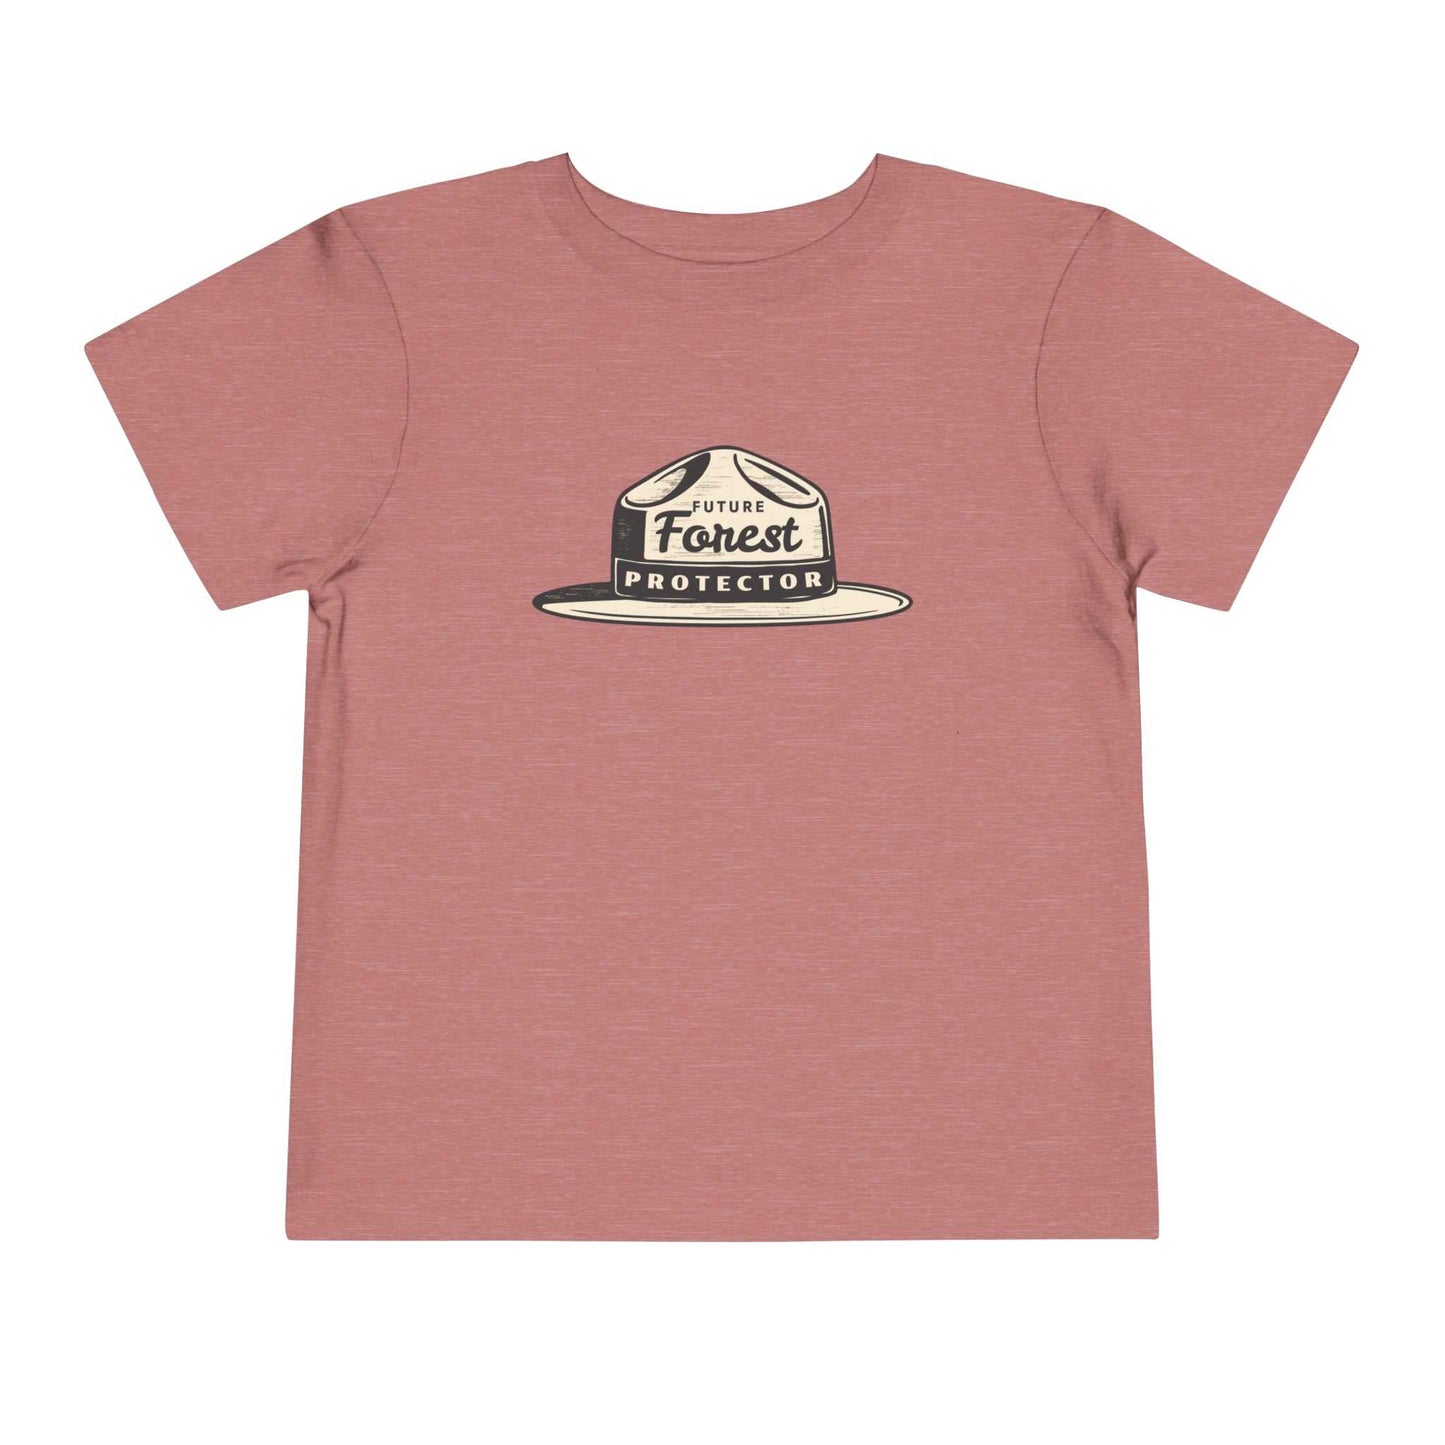 Future Forest Ranger Toddler ShirtInspire those youngins to get outside and become stewards of nature from day one! A great gift for adventure mamas to be :)
- jersey cotton- soft and lightweight
The